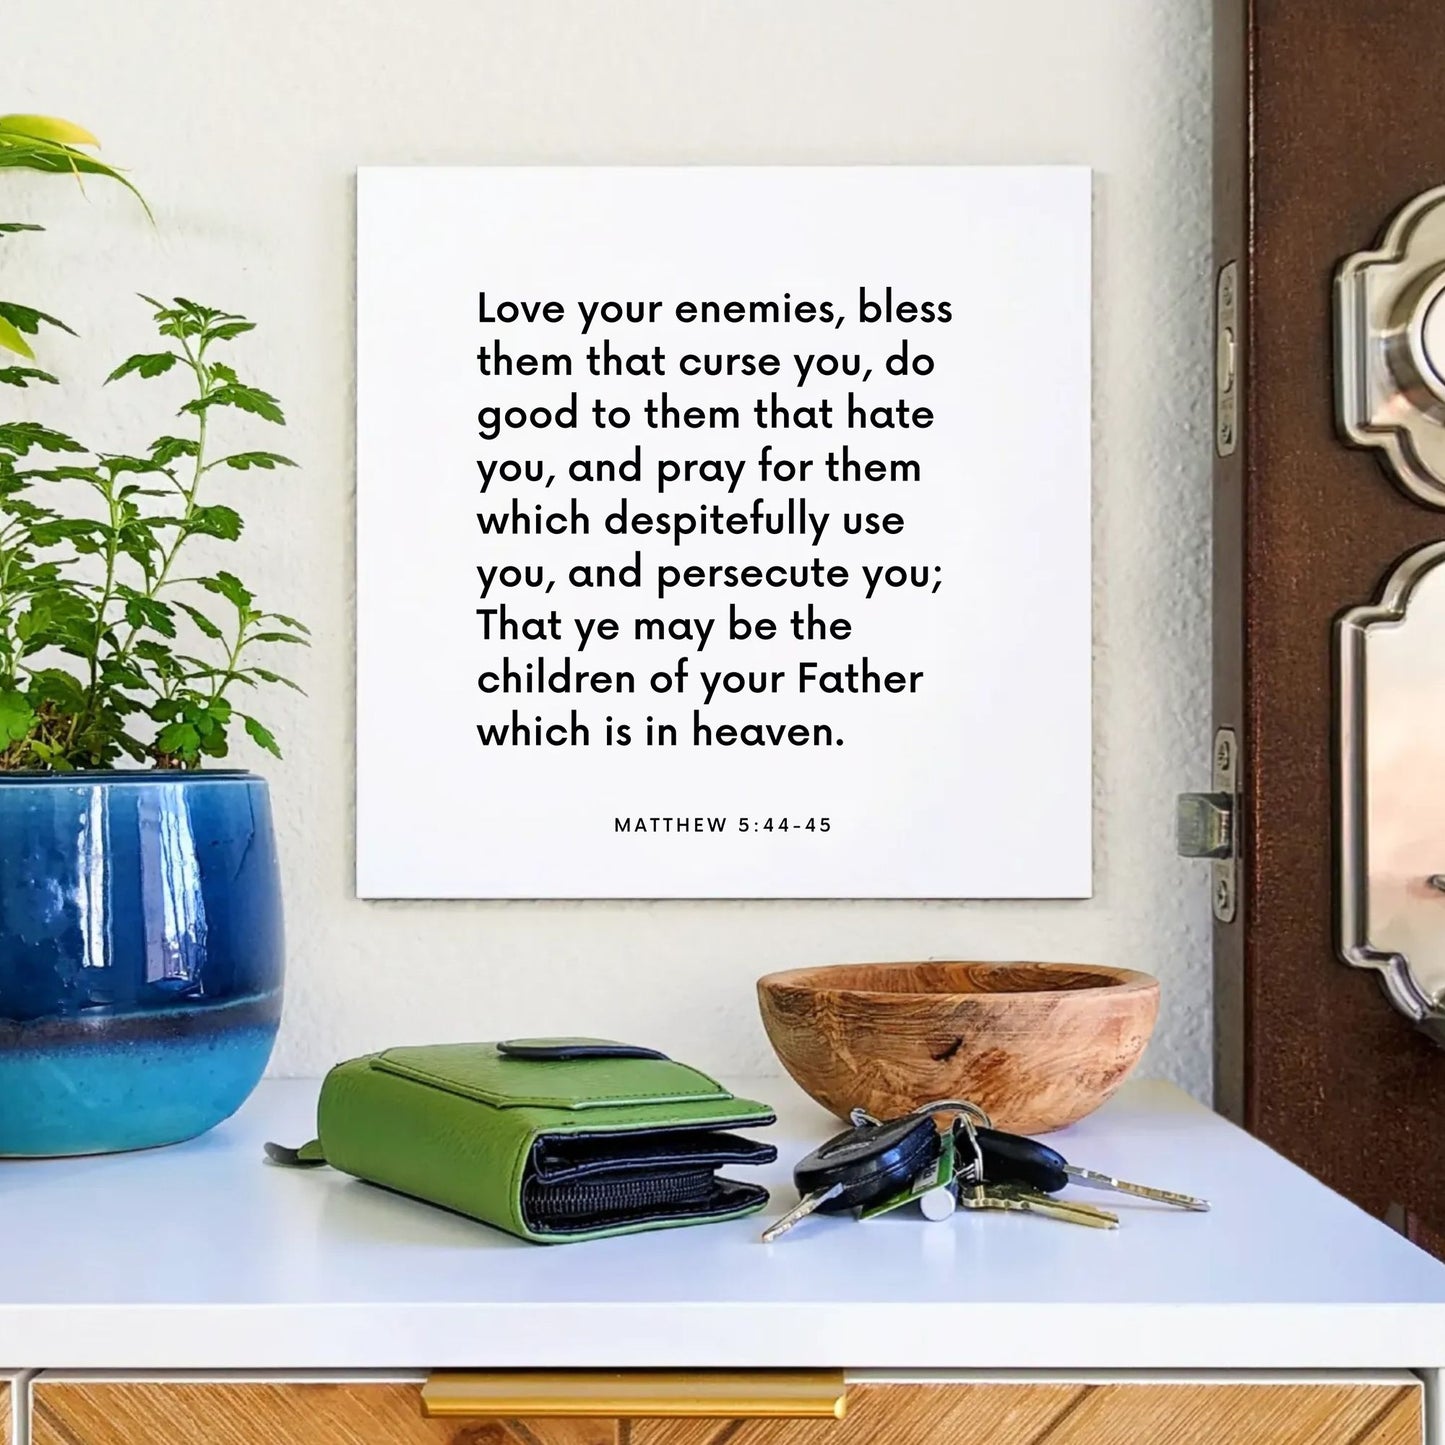 Entryway mouting of the scripture tile for Matthew 5:44-45 - "Love your enemies, bless them that curse you"